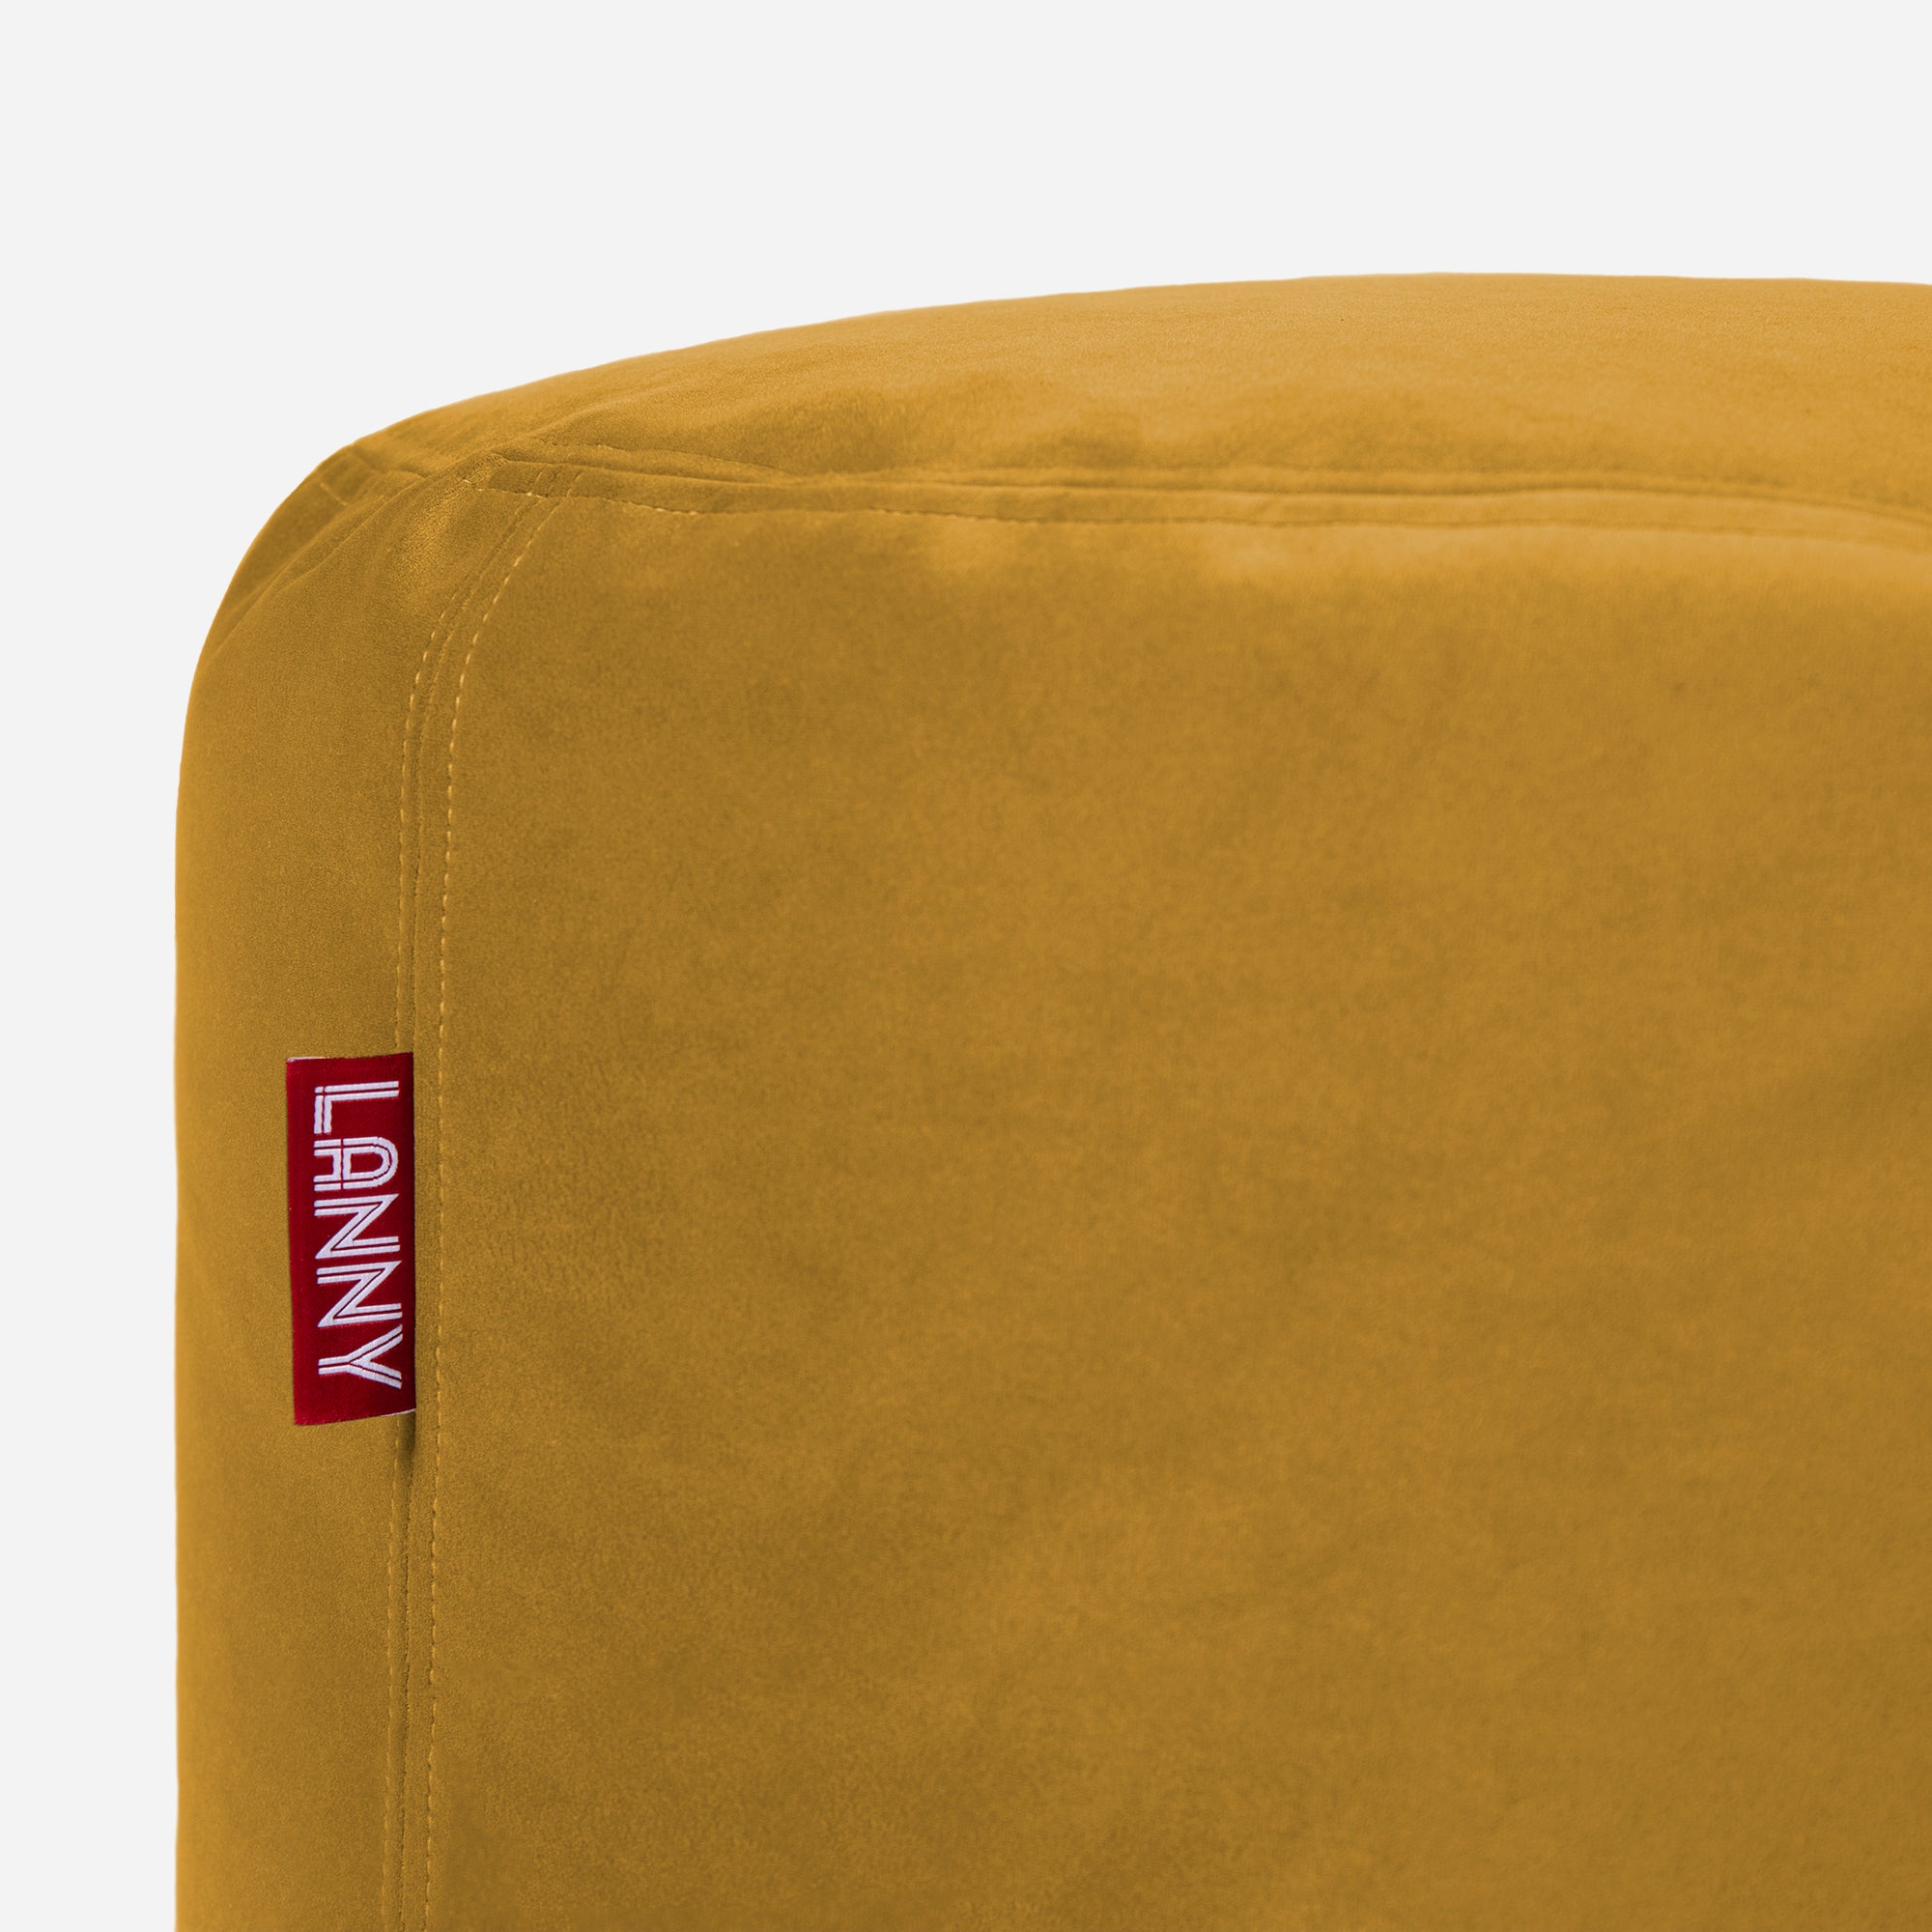 Lanny pouf made from velvet fabric in Mustard color